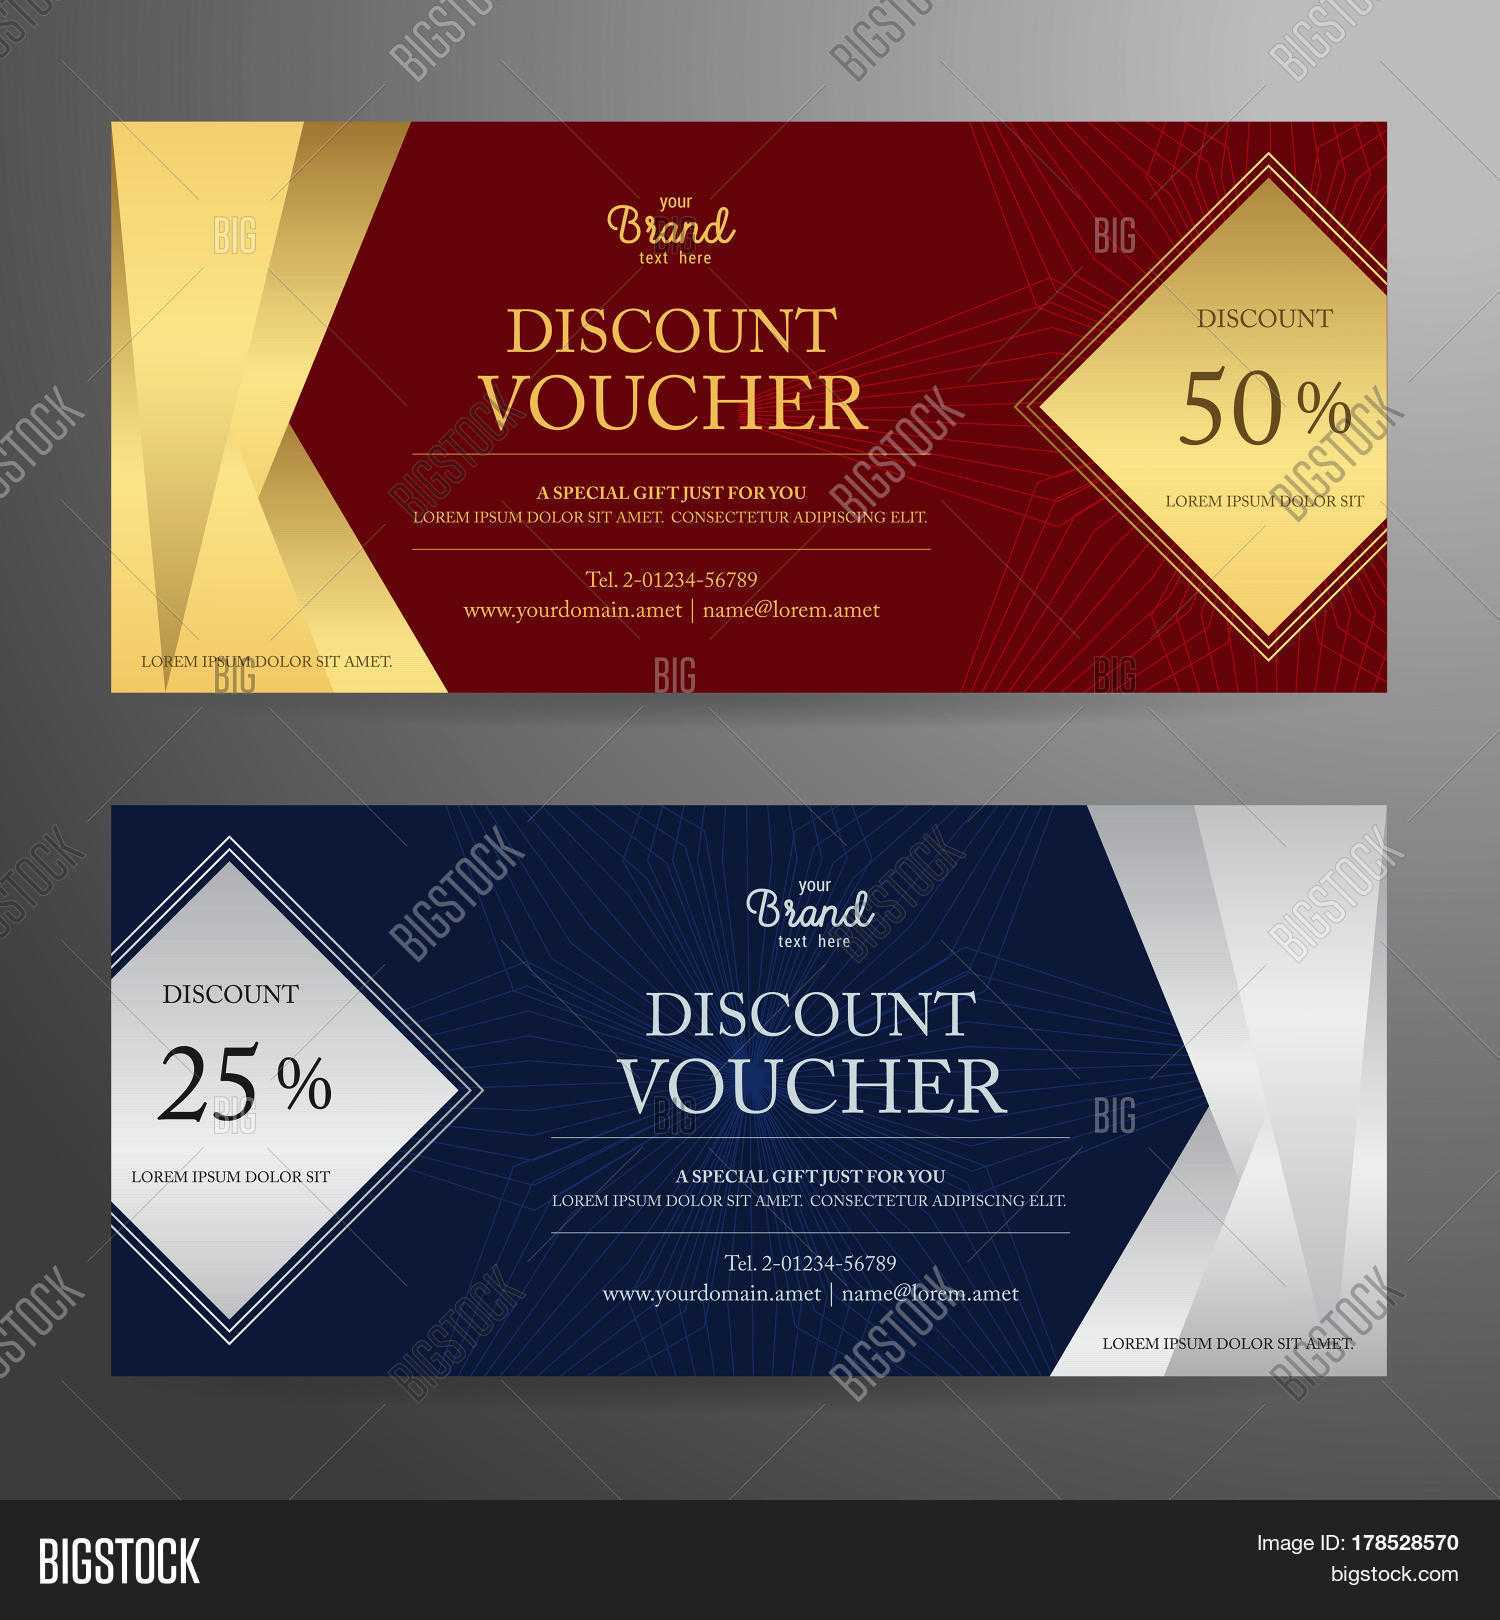 Elegant Gift Voucher Vector & Photo (Free Trial) | Bigstock With Elegant Gift Certificate Template